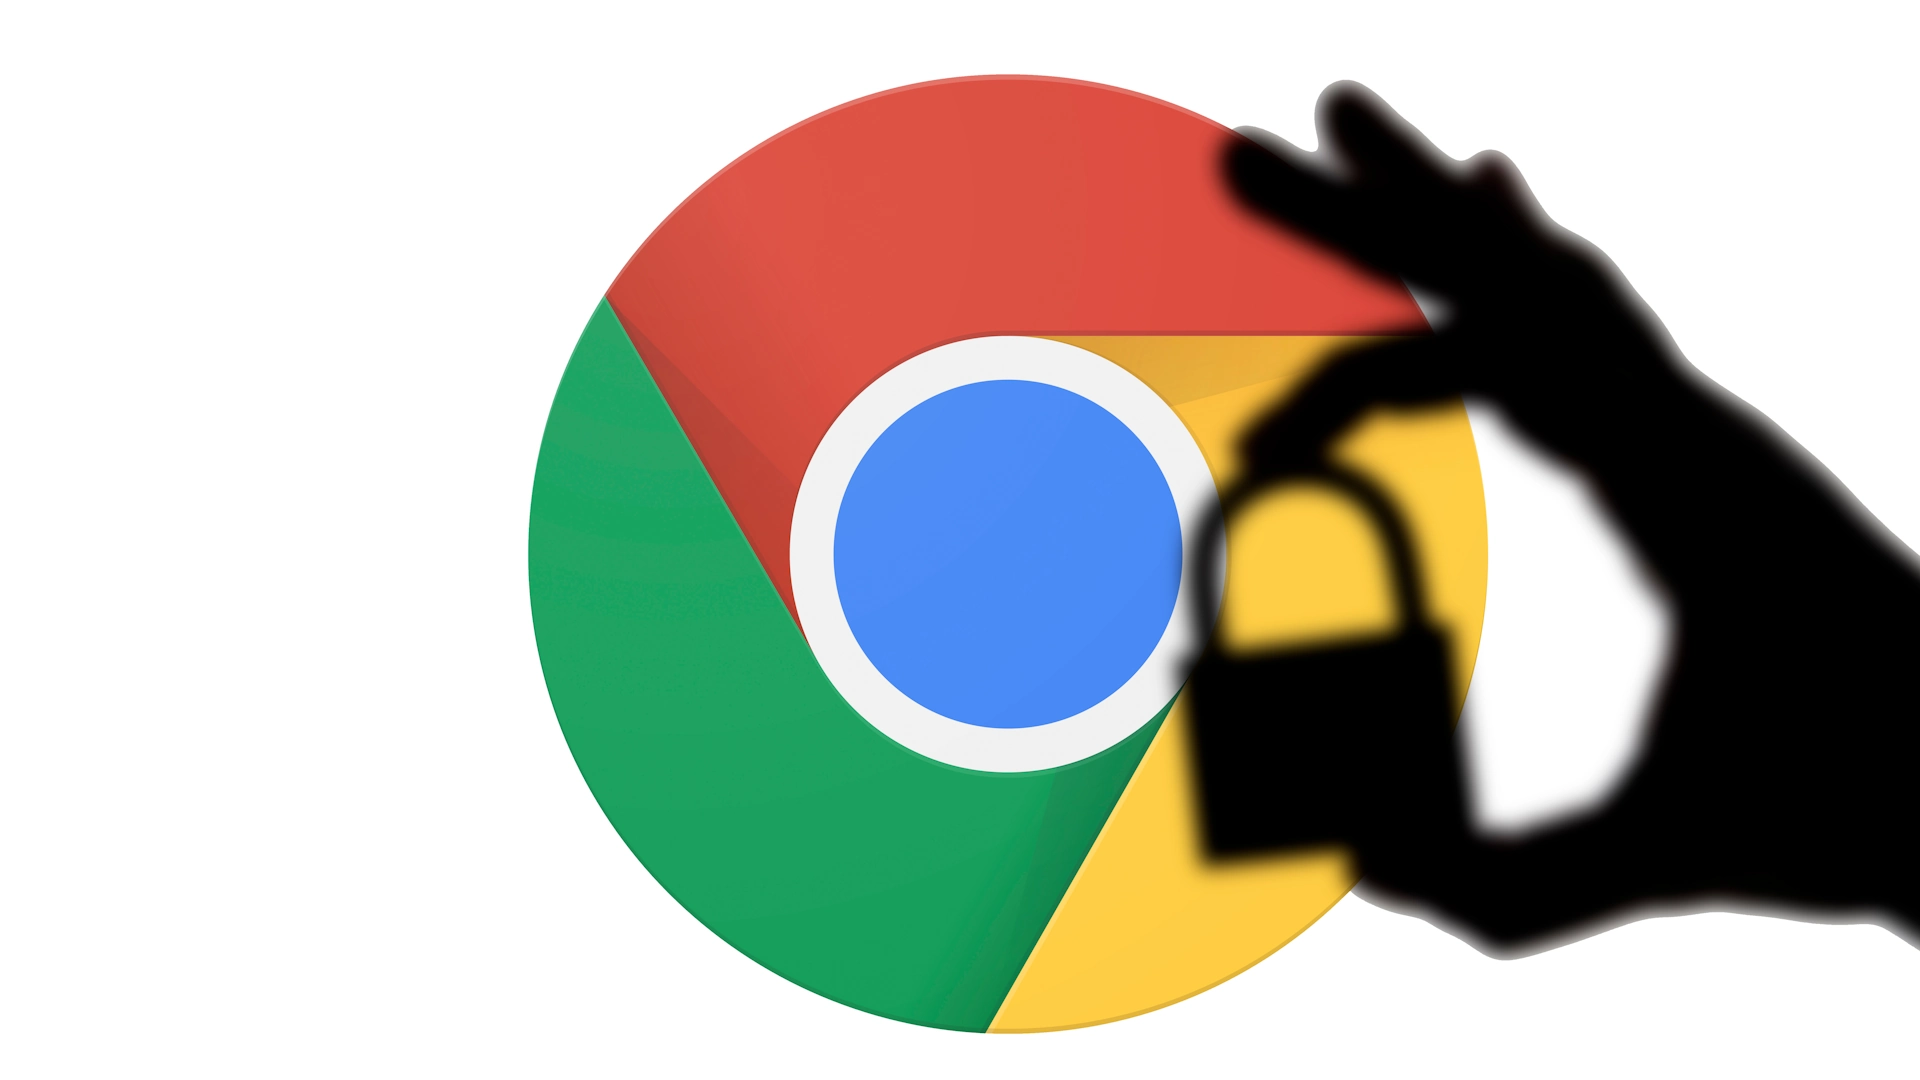 Google Chrome can now check if your saved passwords have been compromised